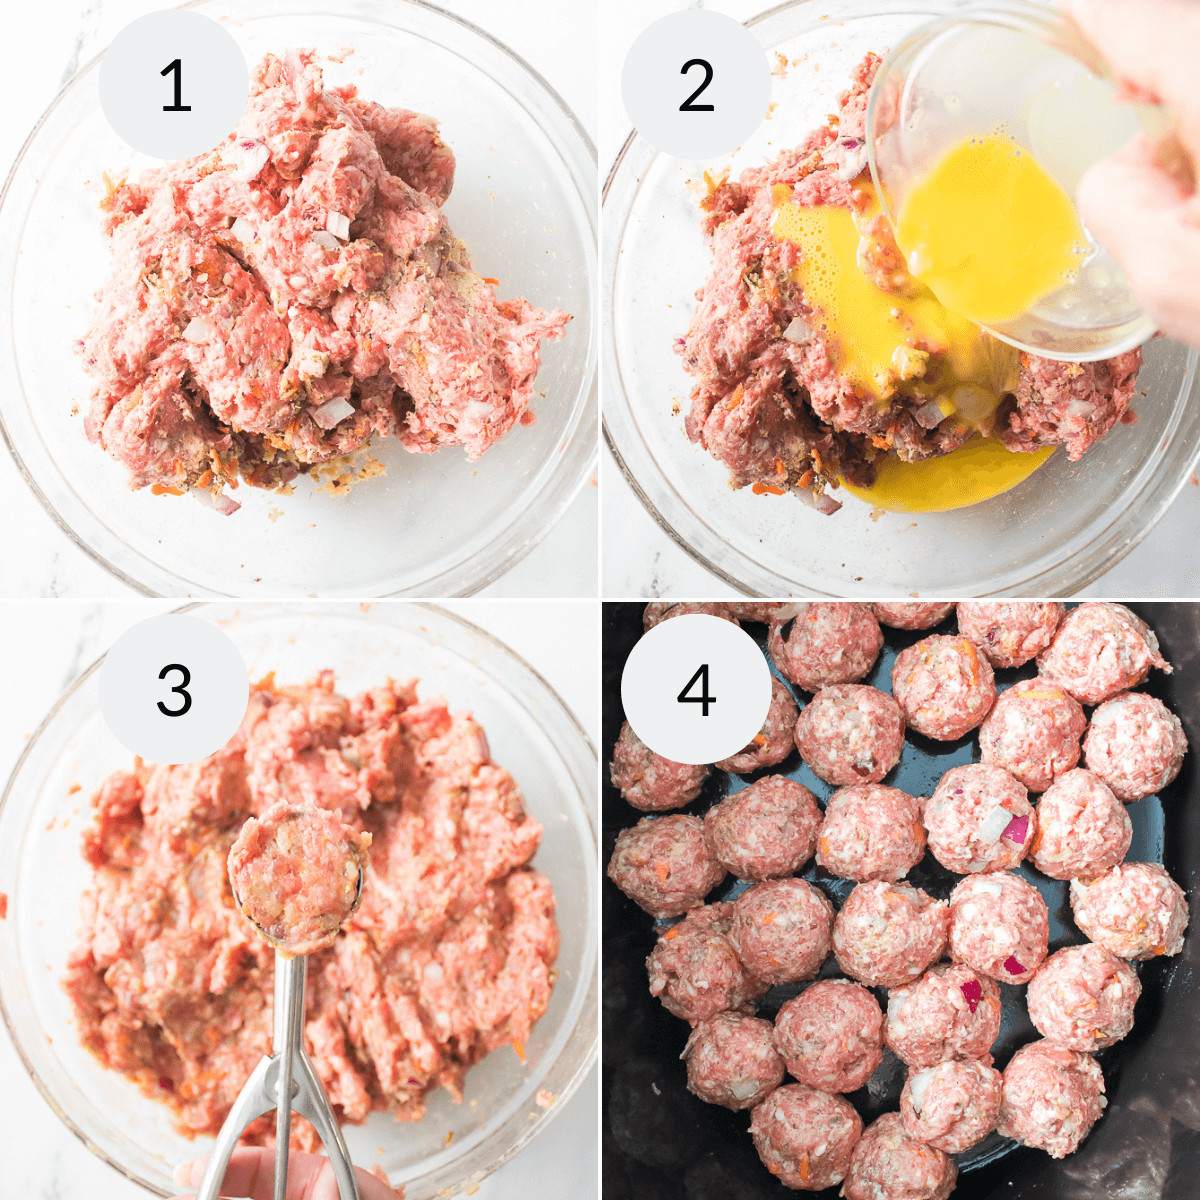 A series of photos demonstrating how to make meatballs for the meal.